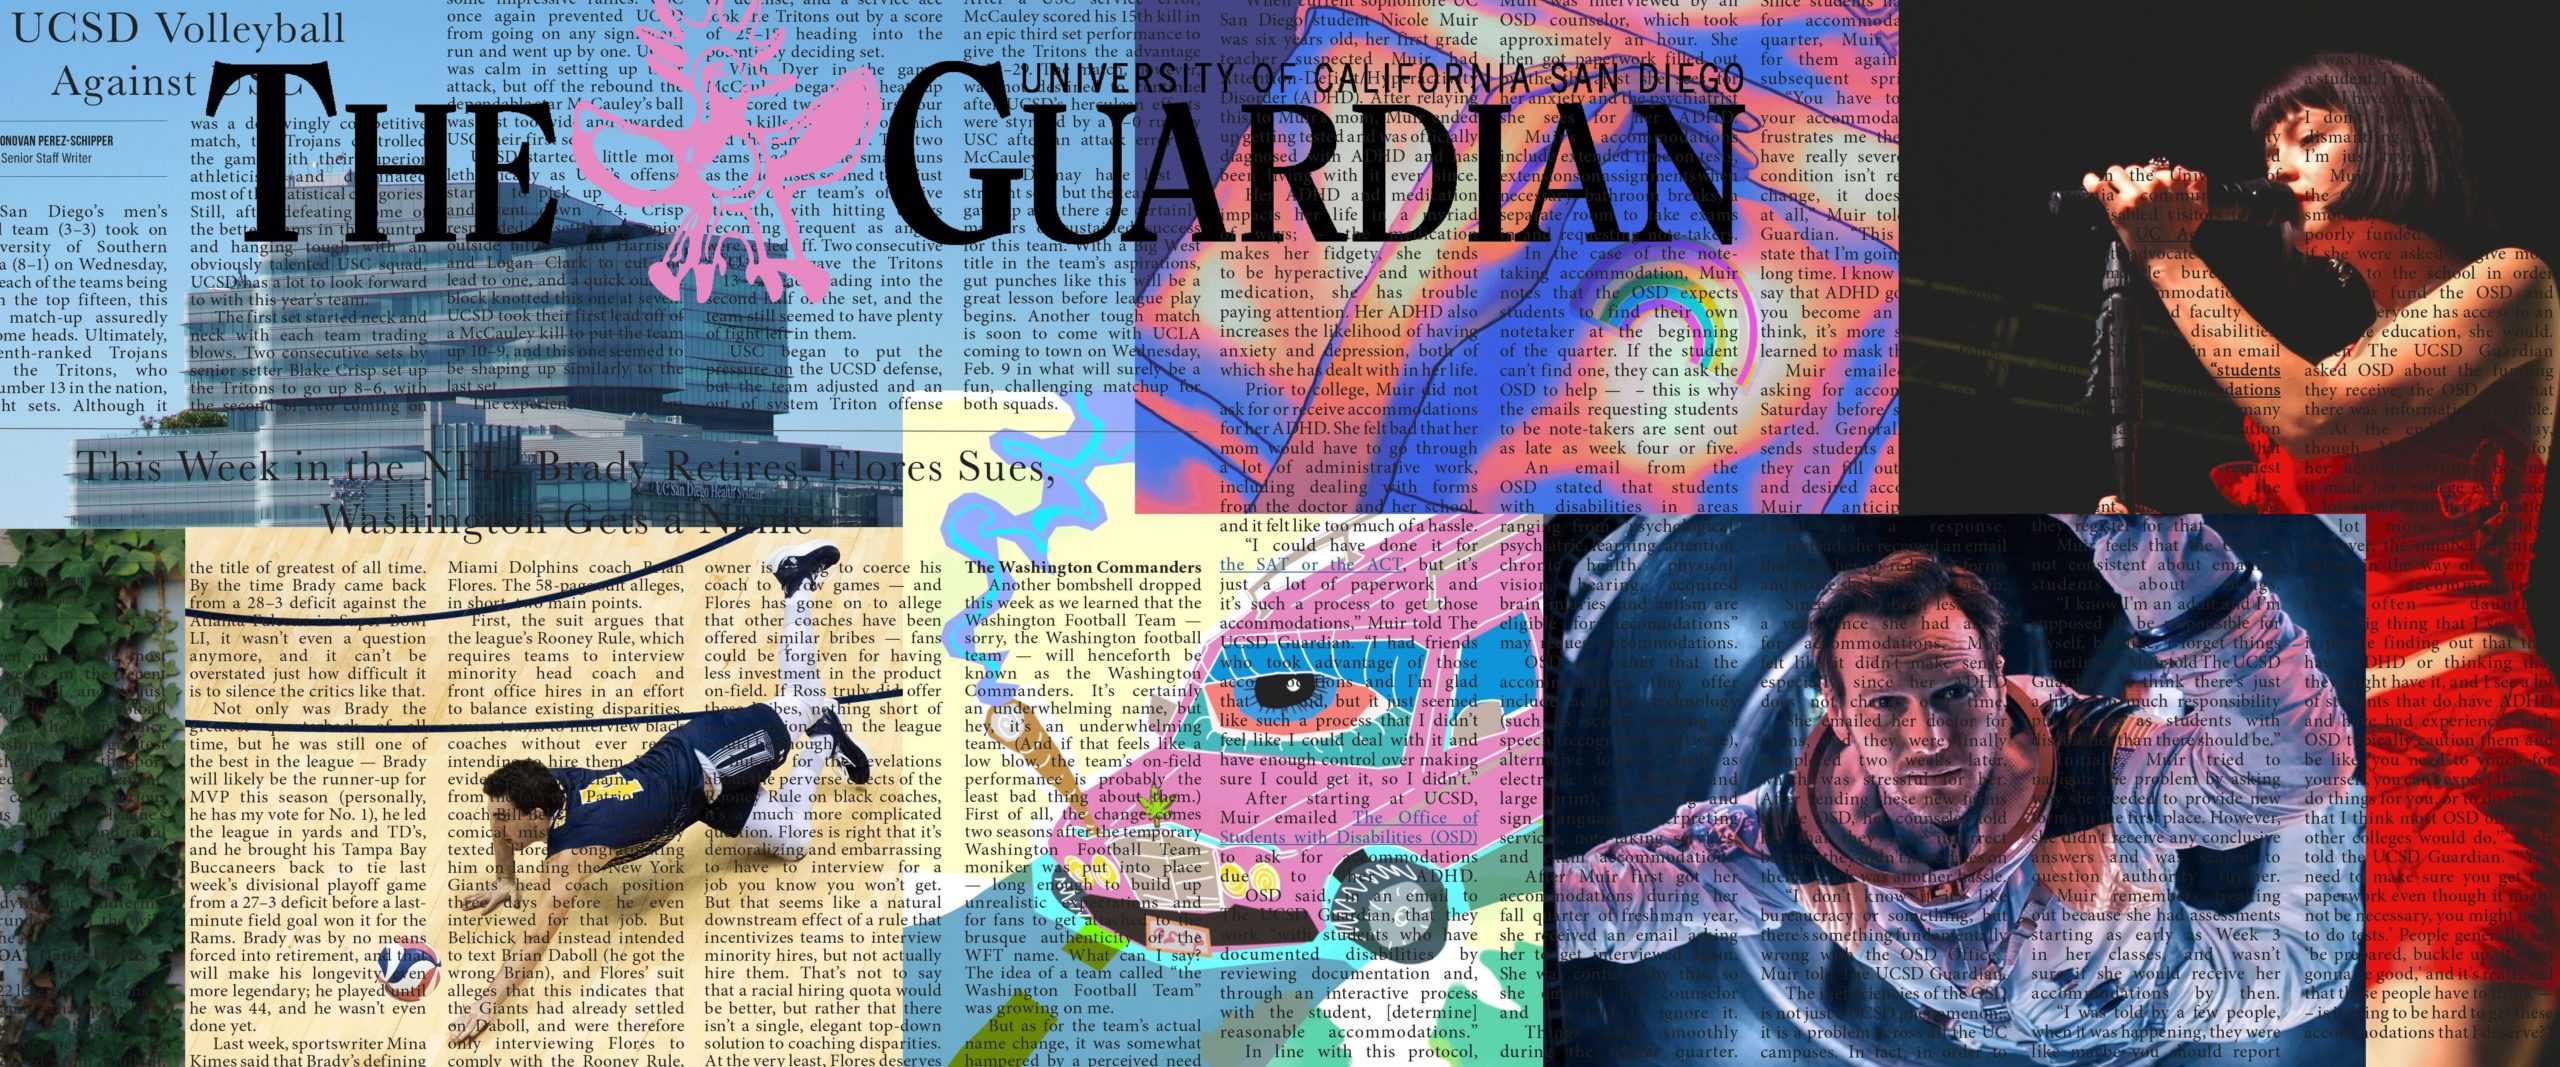 UCSD Guardian Vol.55 Issue 16